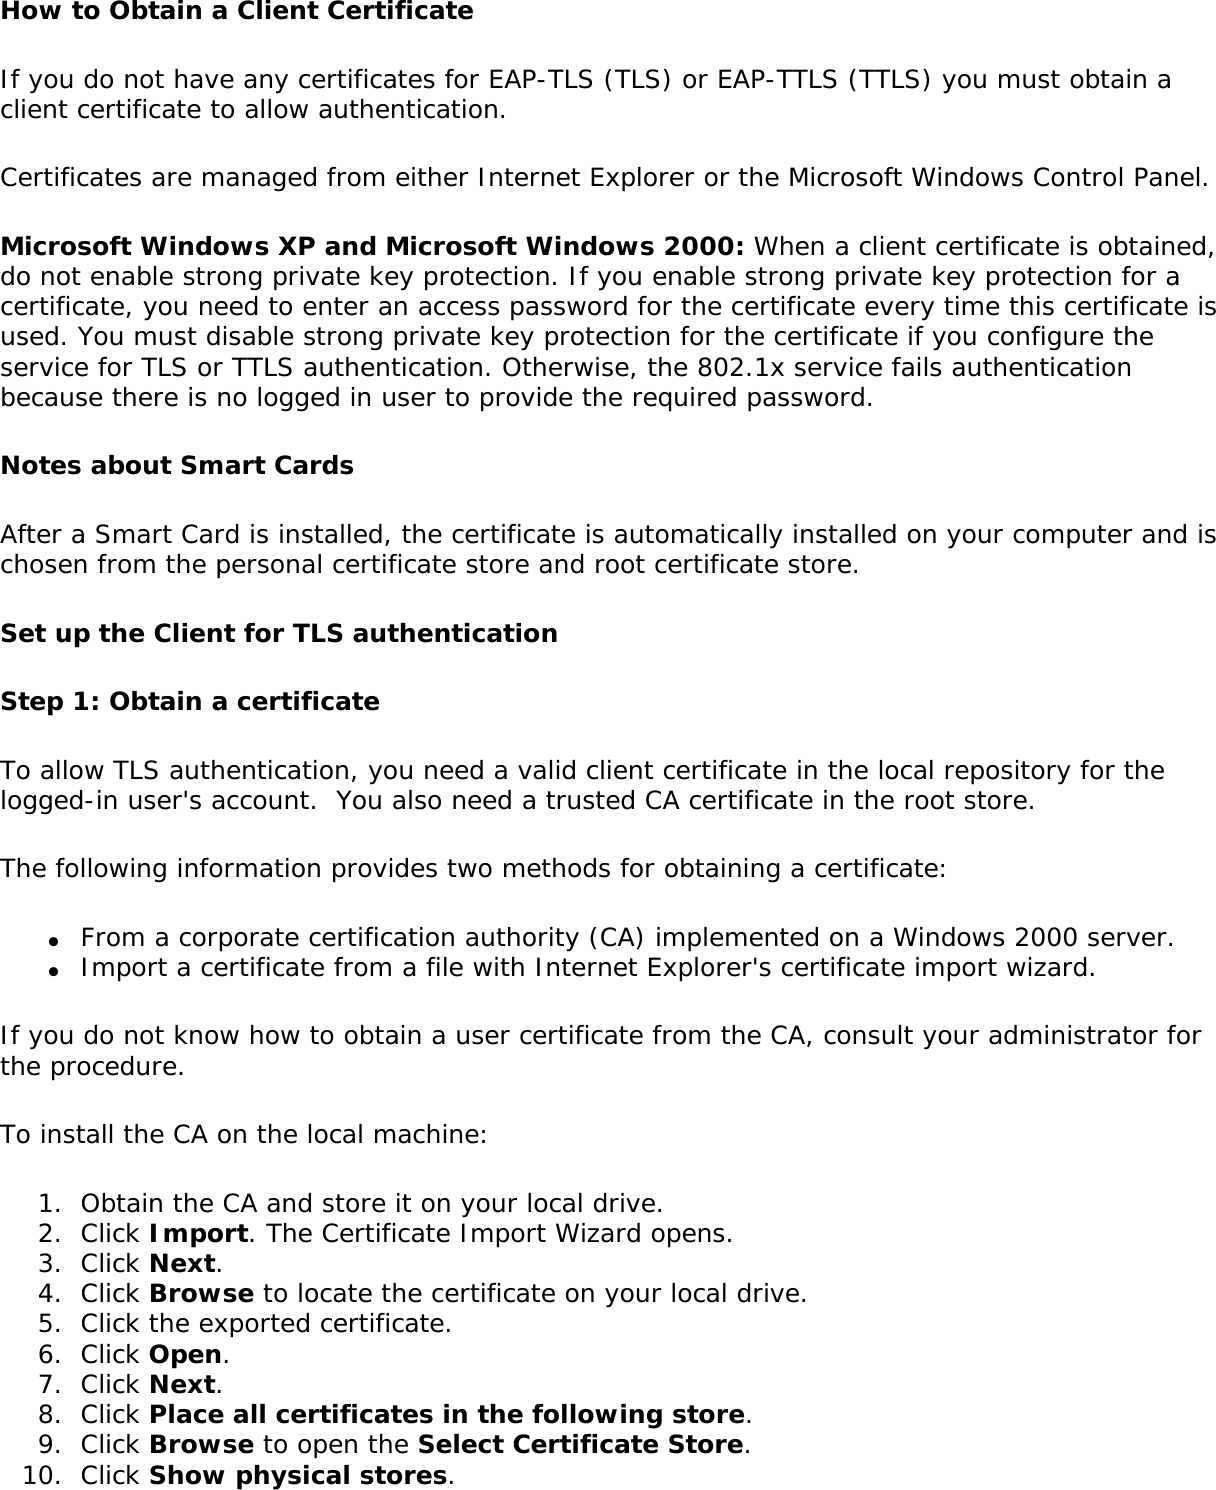 How to Obtain a Client CertificateIf you do not have any certificates for EAP-TLS (TLS) or EAP-TTLS (TTLS) you must obtain a client certificate to allow authentication. Certificates are managed from either Internet Explorer or the Microsoft Windows Control Panel. Microsoft Windows XP and Microsoft Windows 2000: When a client certificate is obtained, do not enable strong private key protection. If you enable strong private key protection for a certificate, you need to enter an access password for the certificate every time this certificate is used. You must disable strong private key protection for the certificate if you configure the service for TLS or TTLS authentication. Otherwise, the 802.1x service fails authentication because there is no logged in user to provide the required password. Notes about Smart Cards After a Smart Card is installed, the certificate is automatically installed on your computer and is chosen from the personal certificate store and root certificate store. Set up the Client for TLS authenticationStep 1: Obtain a certificate To allow TLS authentication, you need a valid client certificate in the local repository for the logged-in user&apos;s account.  You also need a trusted CA certificate in the root store. The following information provides two methods for obtaining a certificate: ●     From a corporate certification authority (CA) implemented on a Windows 2000 server.●     Import a certificate from a file with Internet Explorer&apos;s certificate import wizard.If you do not know how to obtain a user certificate from the CA, consult your administrator for the procedure. To install the CA on the local machine: 1.  Obtain the CA and store it on your local drive.2.  Click Import. The Certificate Import Wizard opens.3.  Click Next.4.  Click Browse to locate the certificate on your local drive.5.  Click the exported certificate.6.  Click Open.7.  Click Next.8.  Click Place all certificates in the following store.9.  Click Browse to open the Select Certificate Store.10.  Click Show physical stores.